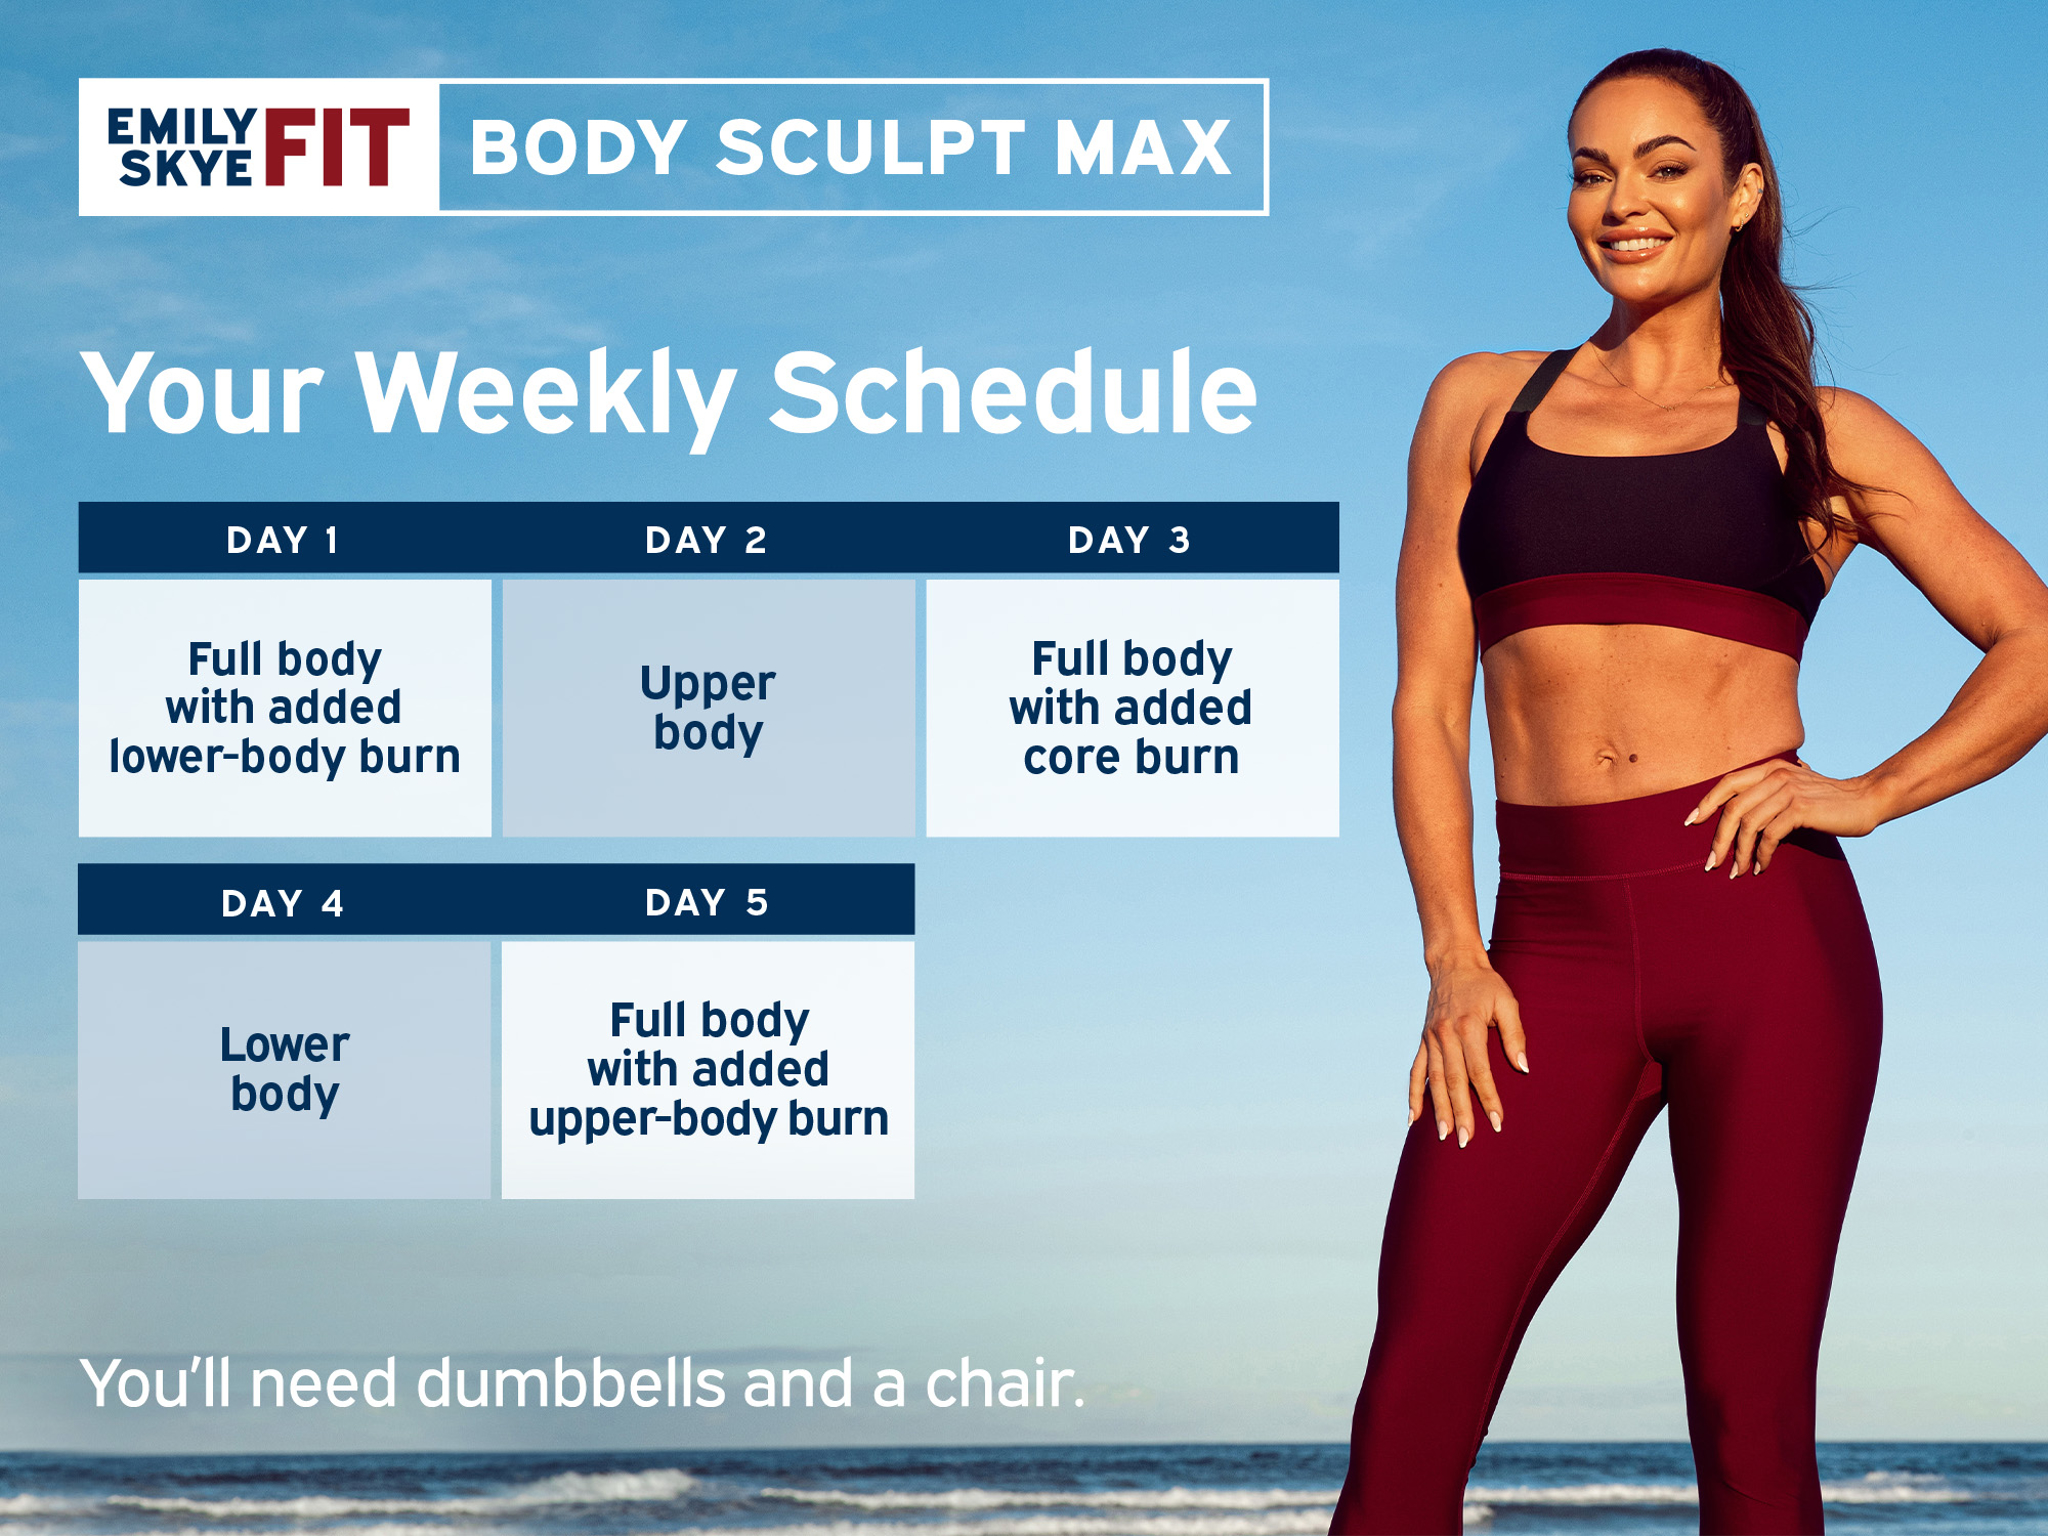 I'm turning up the burn with Body Sculpt MAX